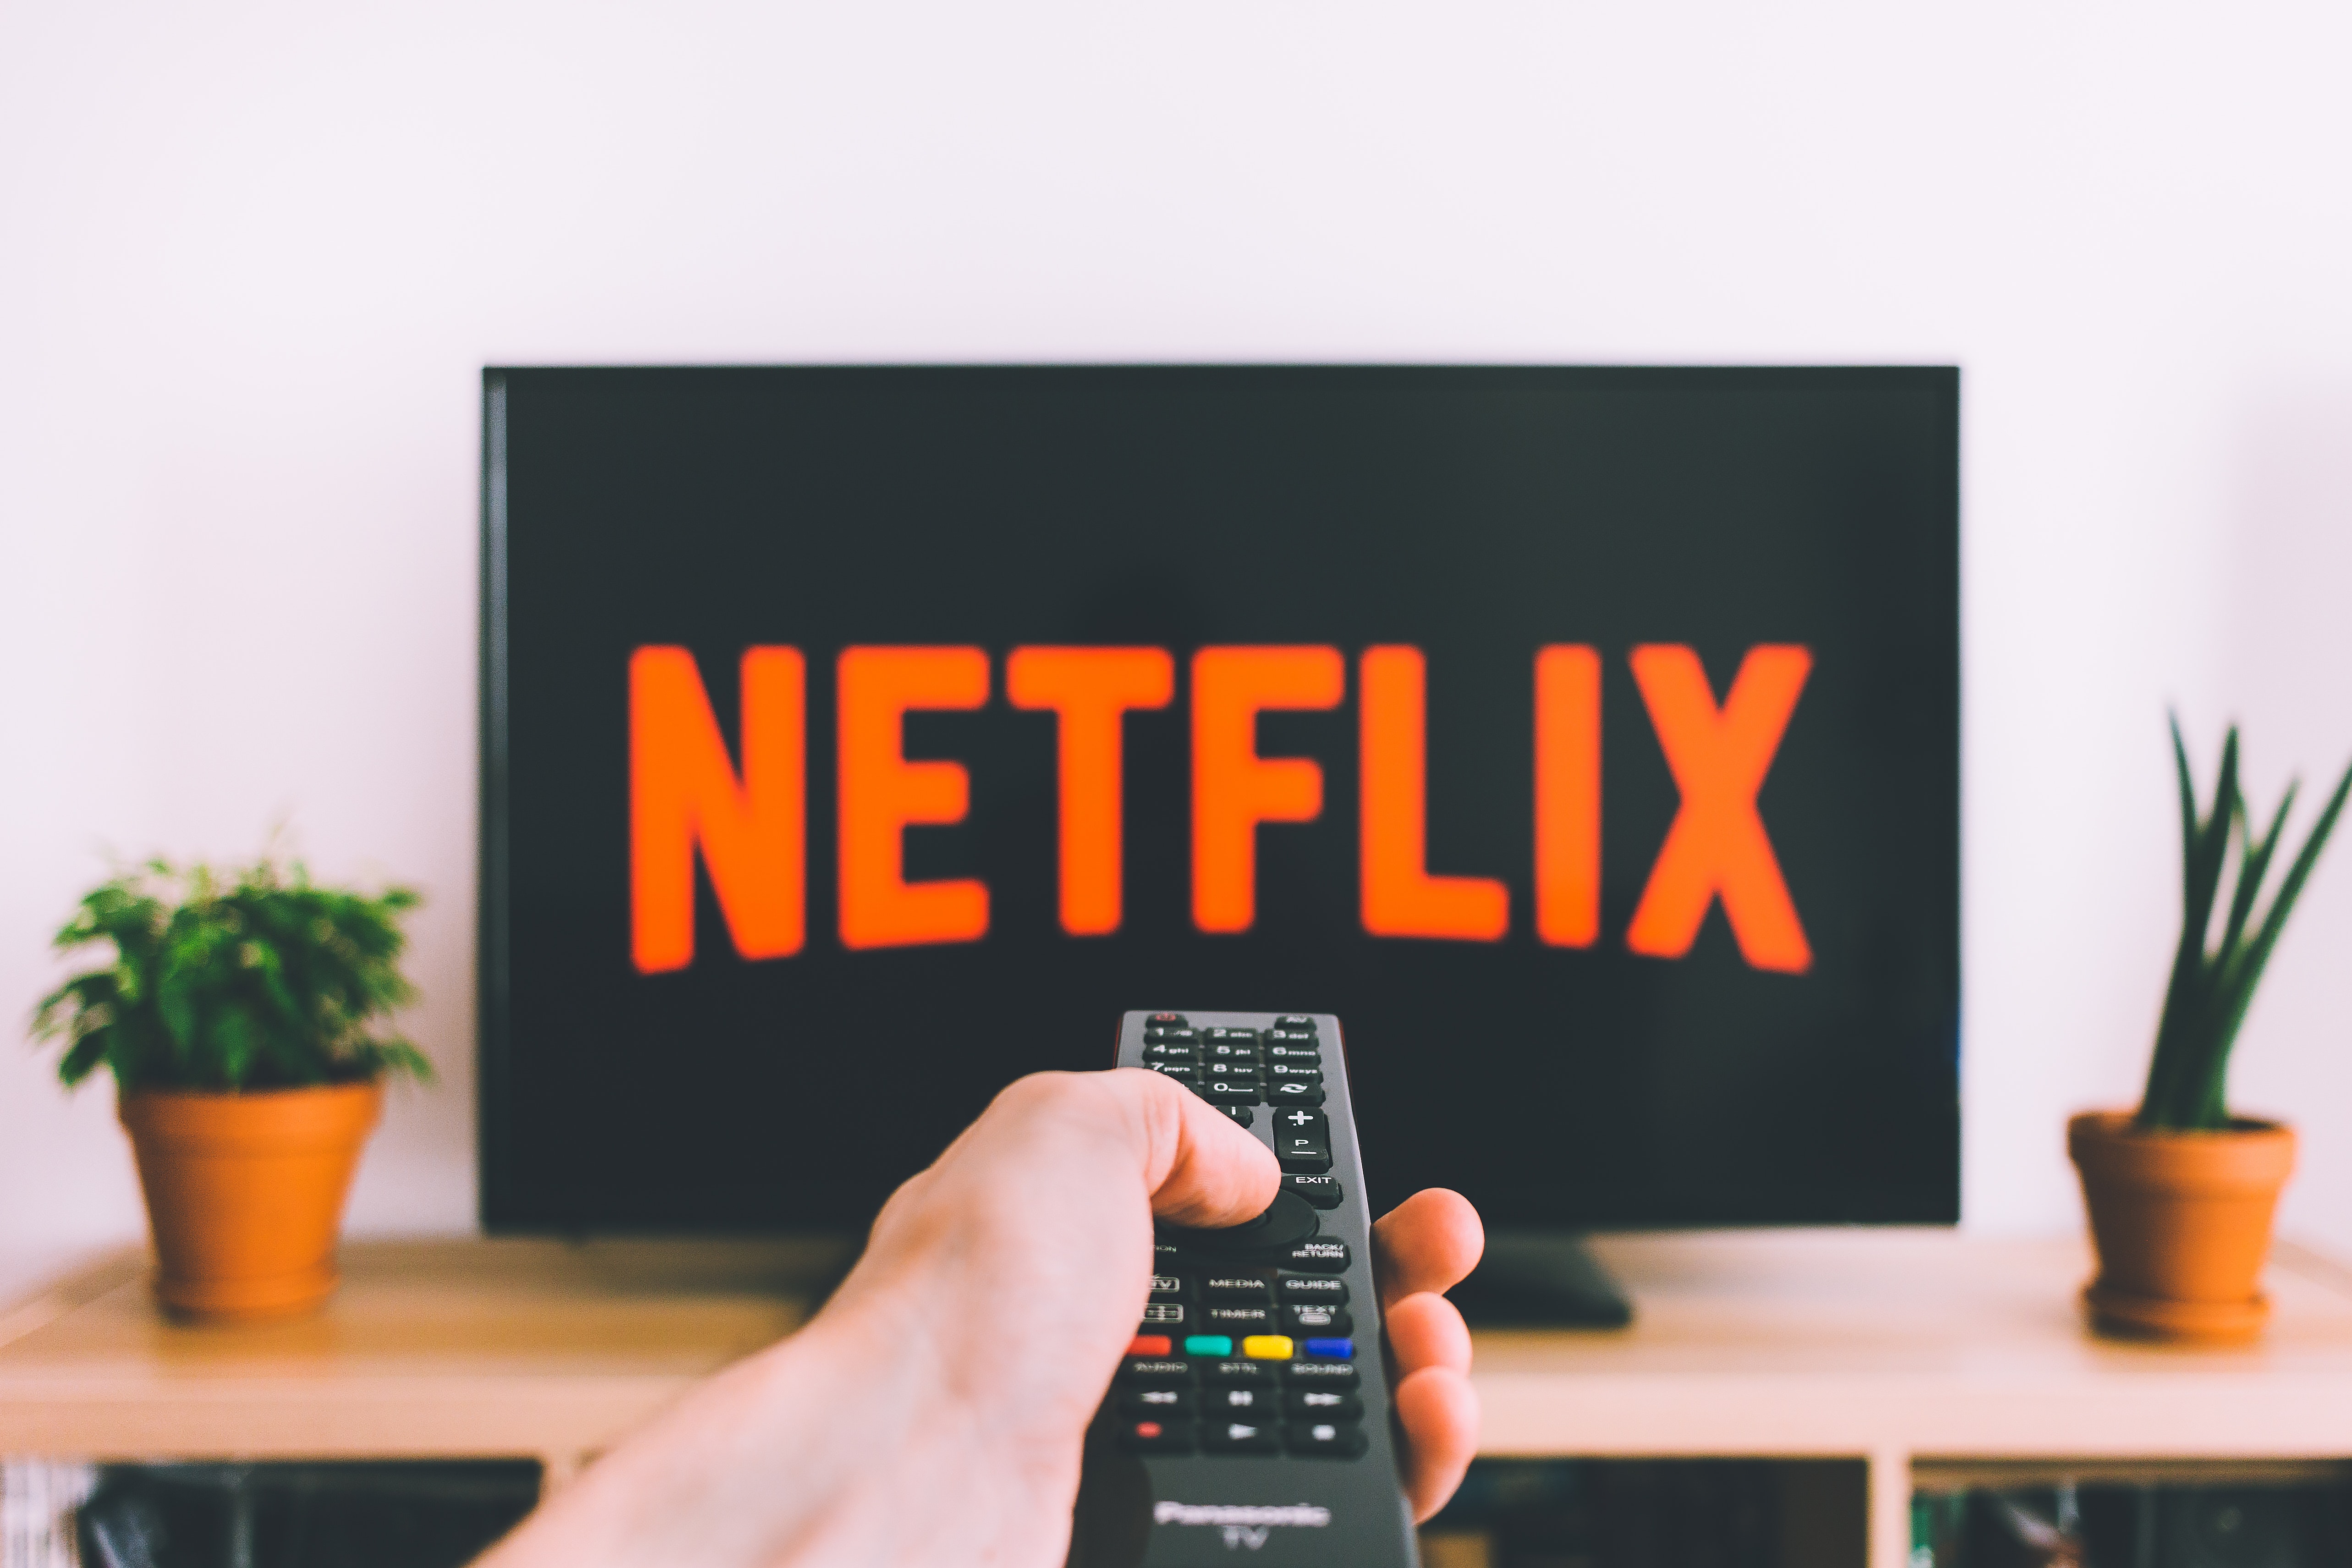 Netflix reduces video quality per month and reduces data consumption by 25%